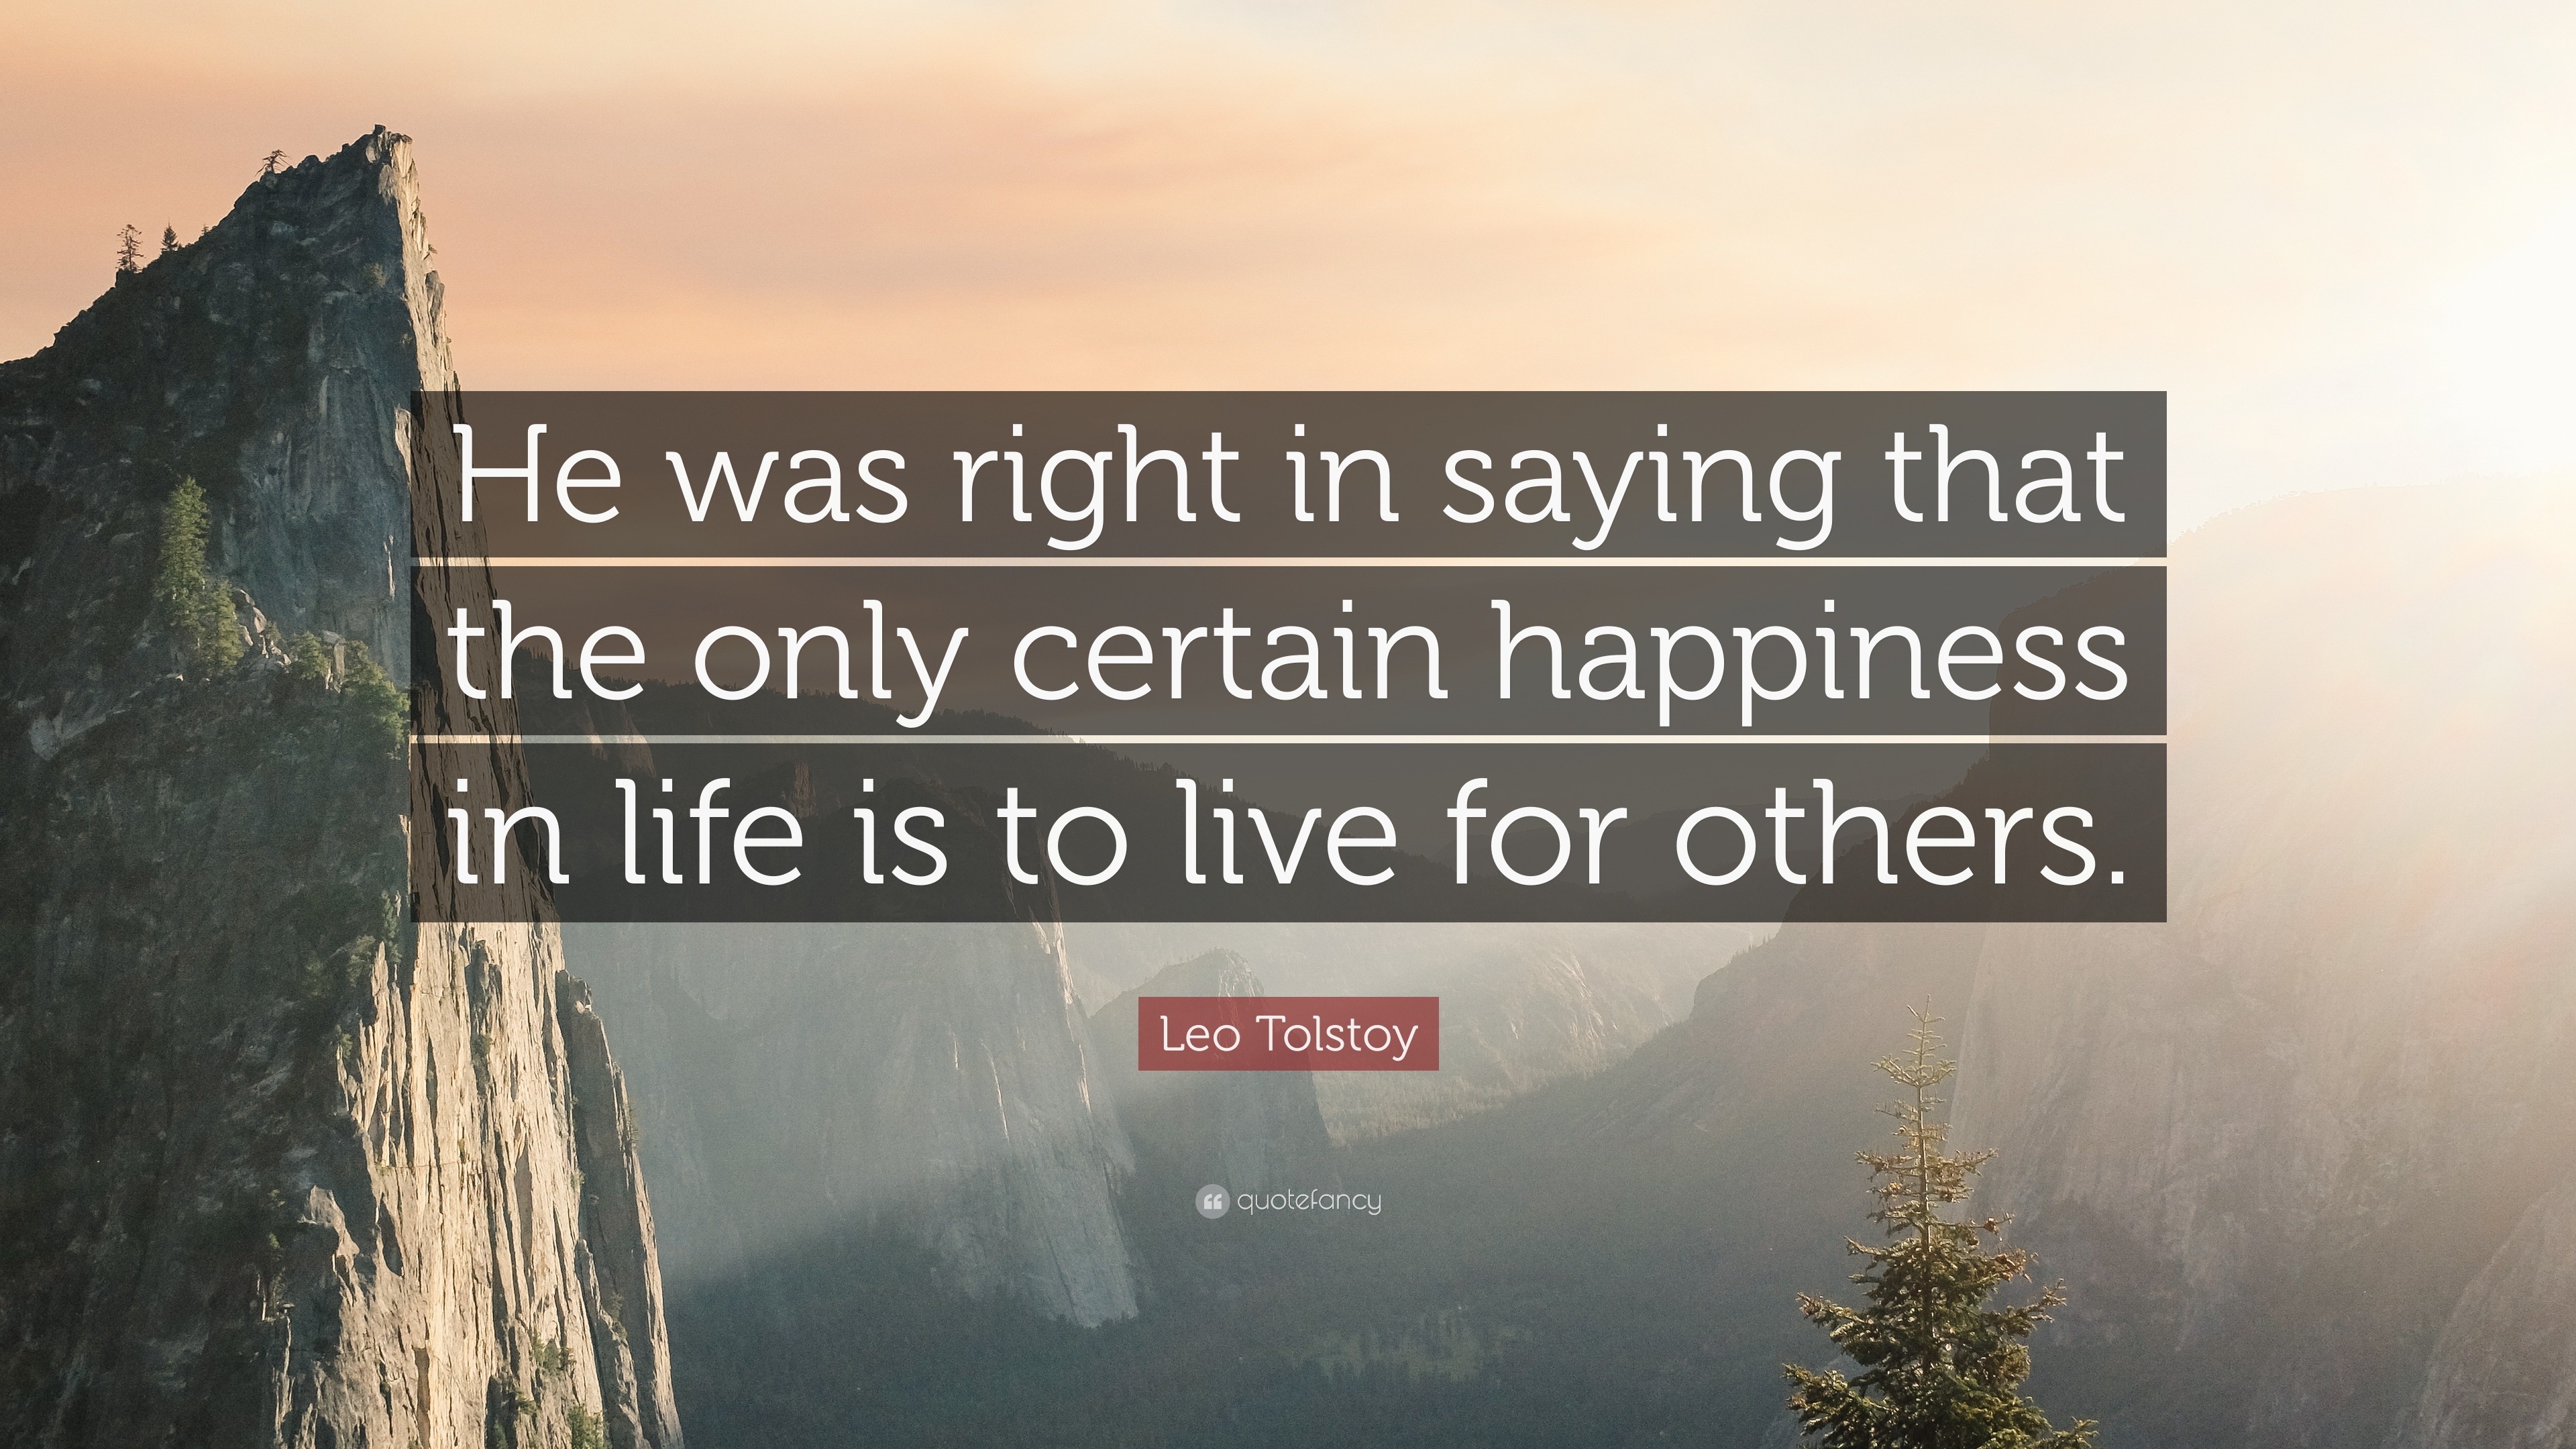 Leo Tolstoy Quote: “He was right in saying that the only certain ...